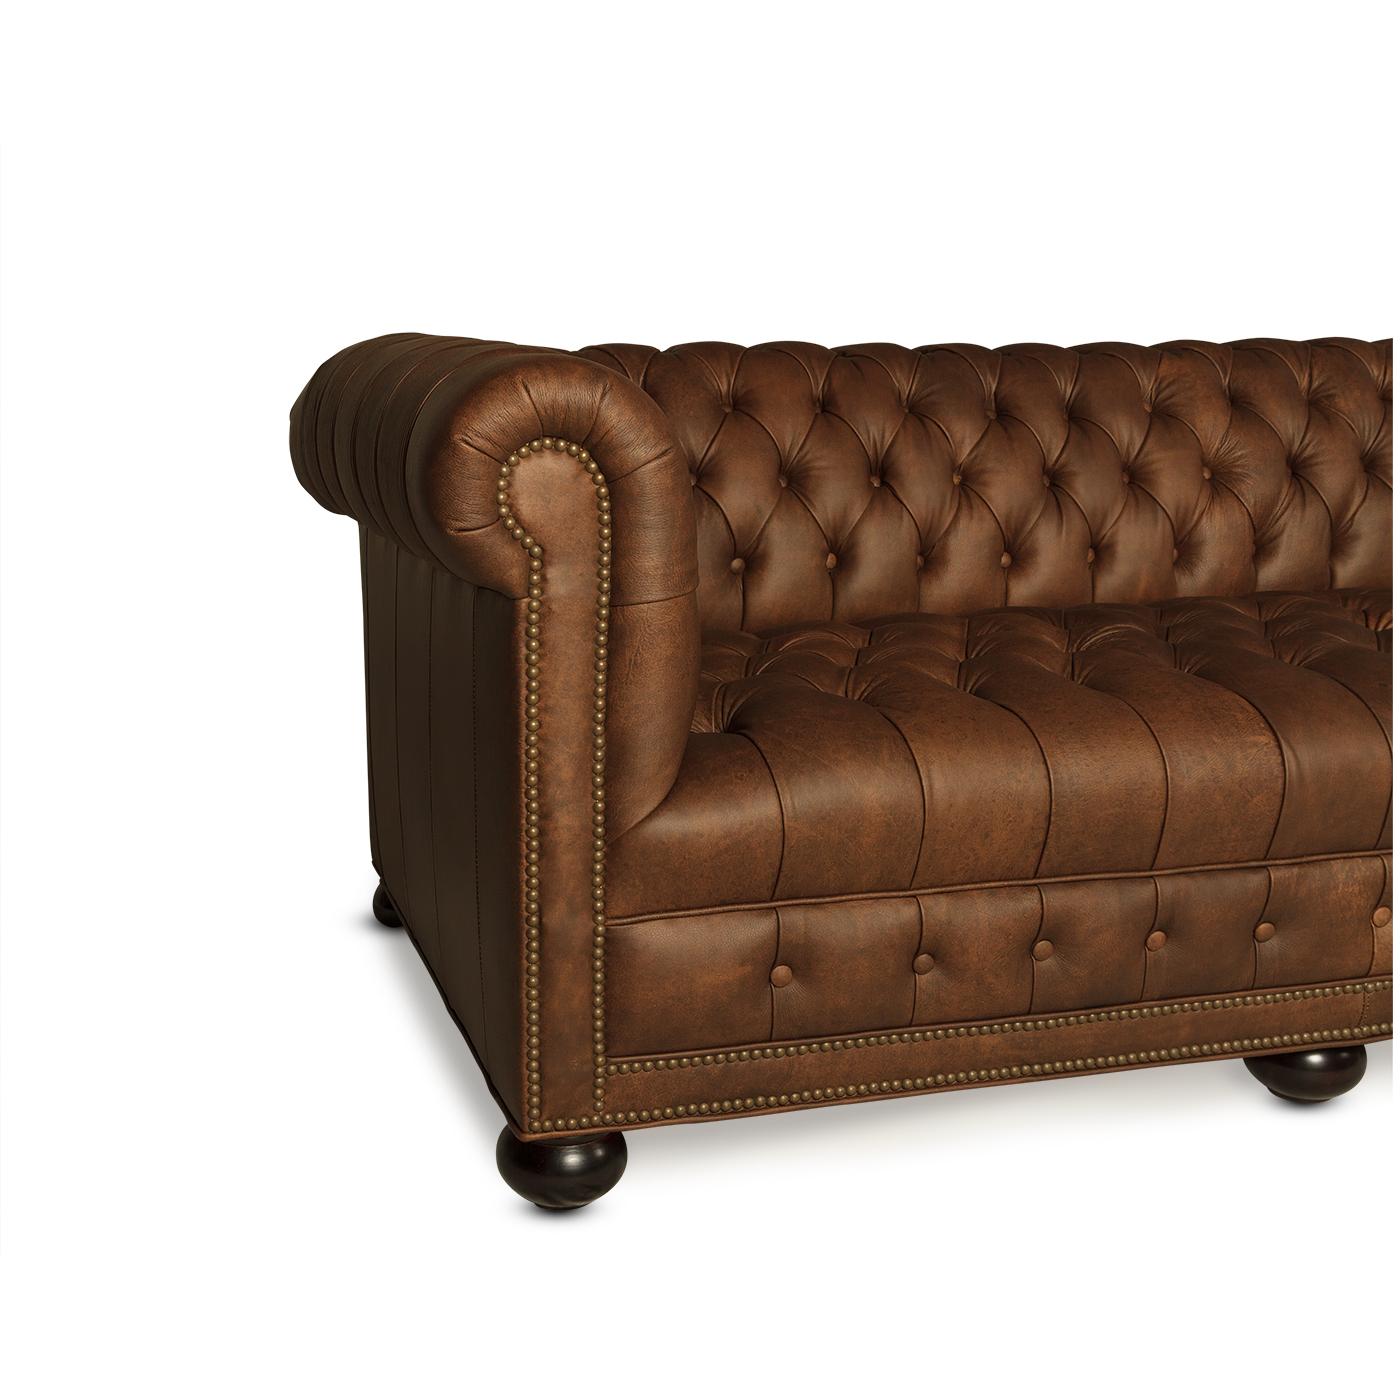 A classic long leather 4 seater Chesterfield sofa. The unusual long tufted chesterfield sofa is ideal for a long entry hall, living room, a hotel lobby, or a public waiting area. Covered in a 